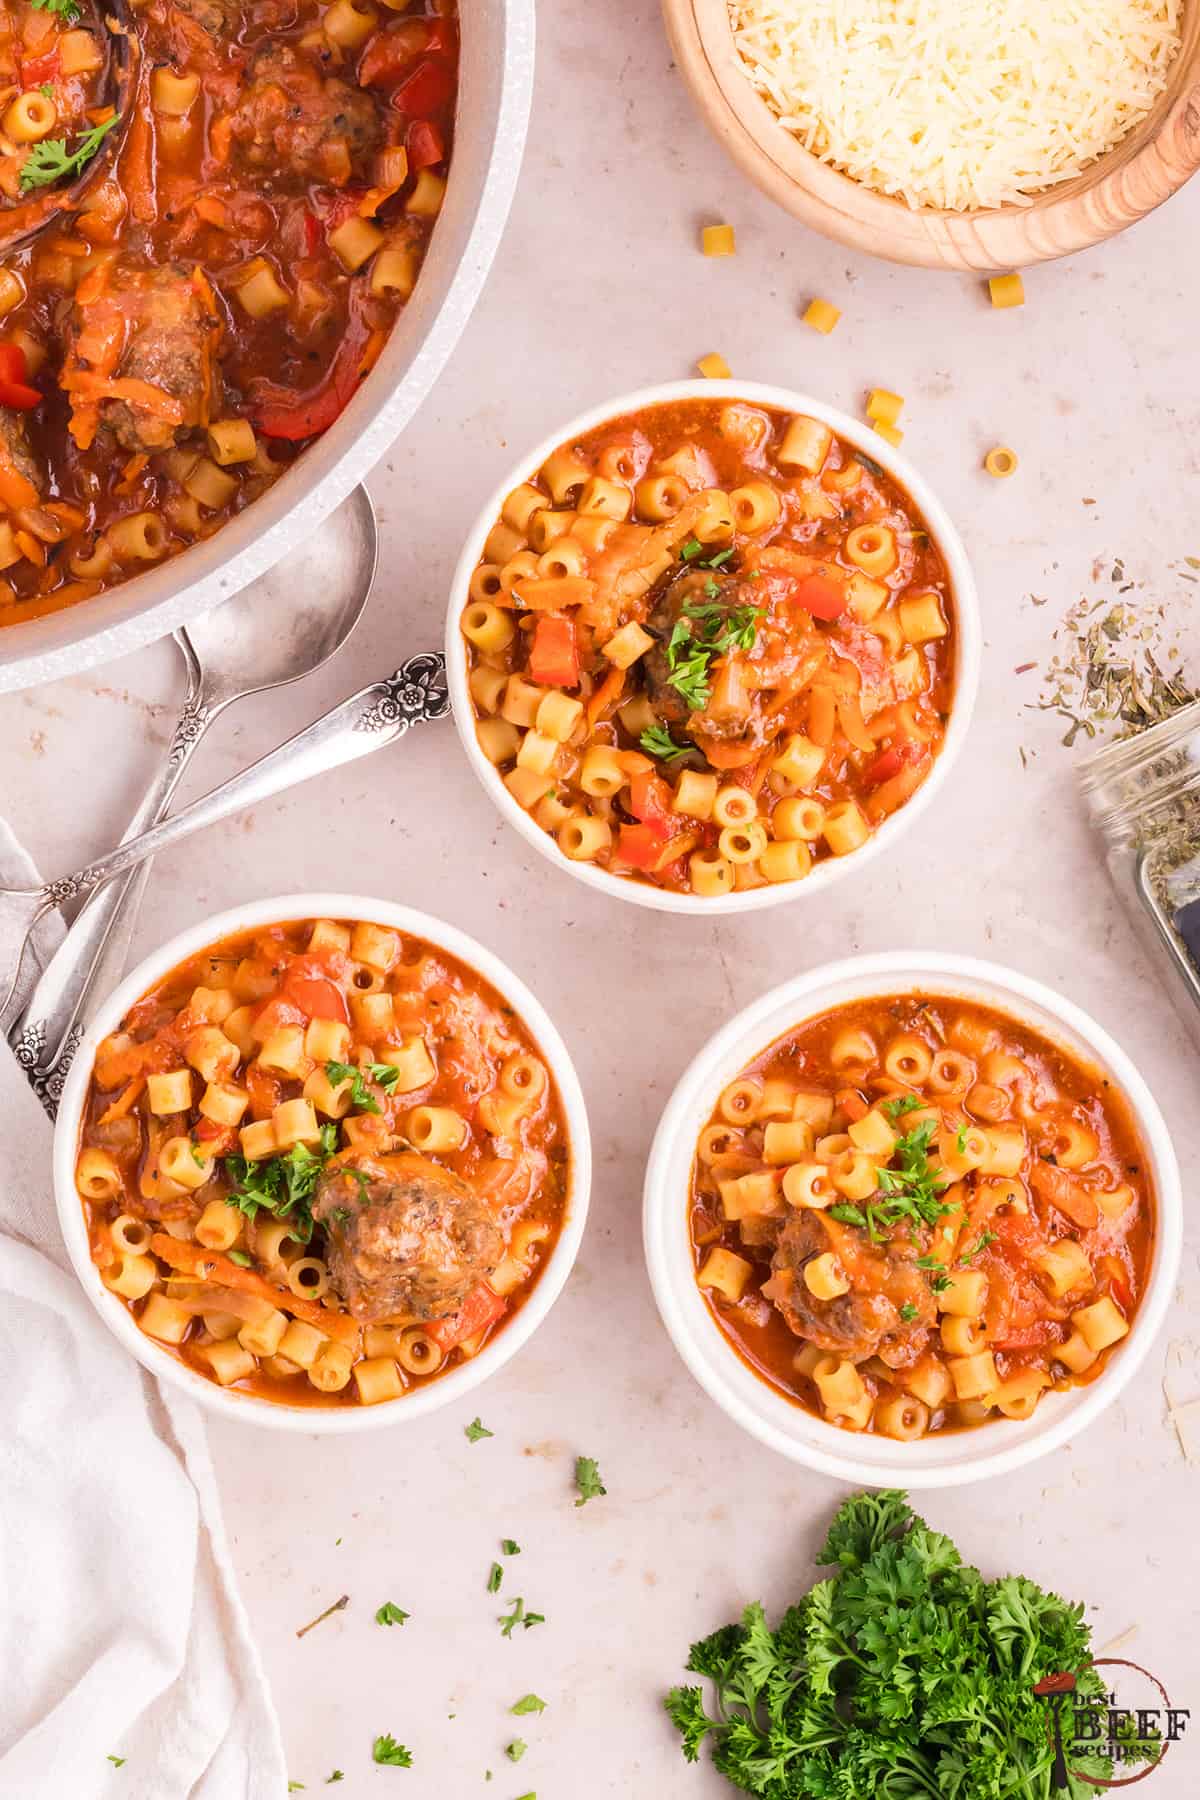 Three bowls of Italian soup with meatballs topped with Parsley